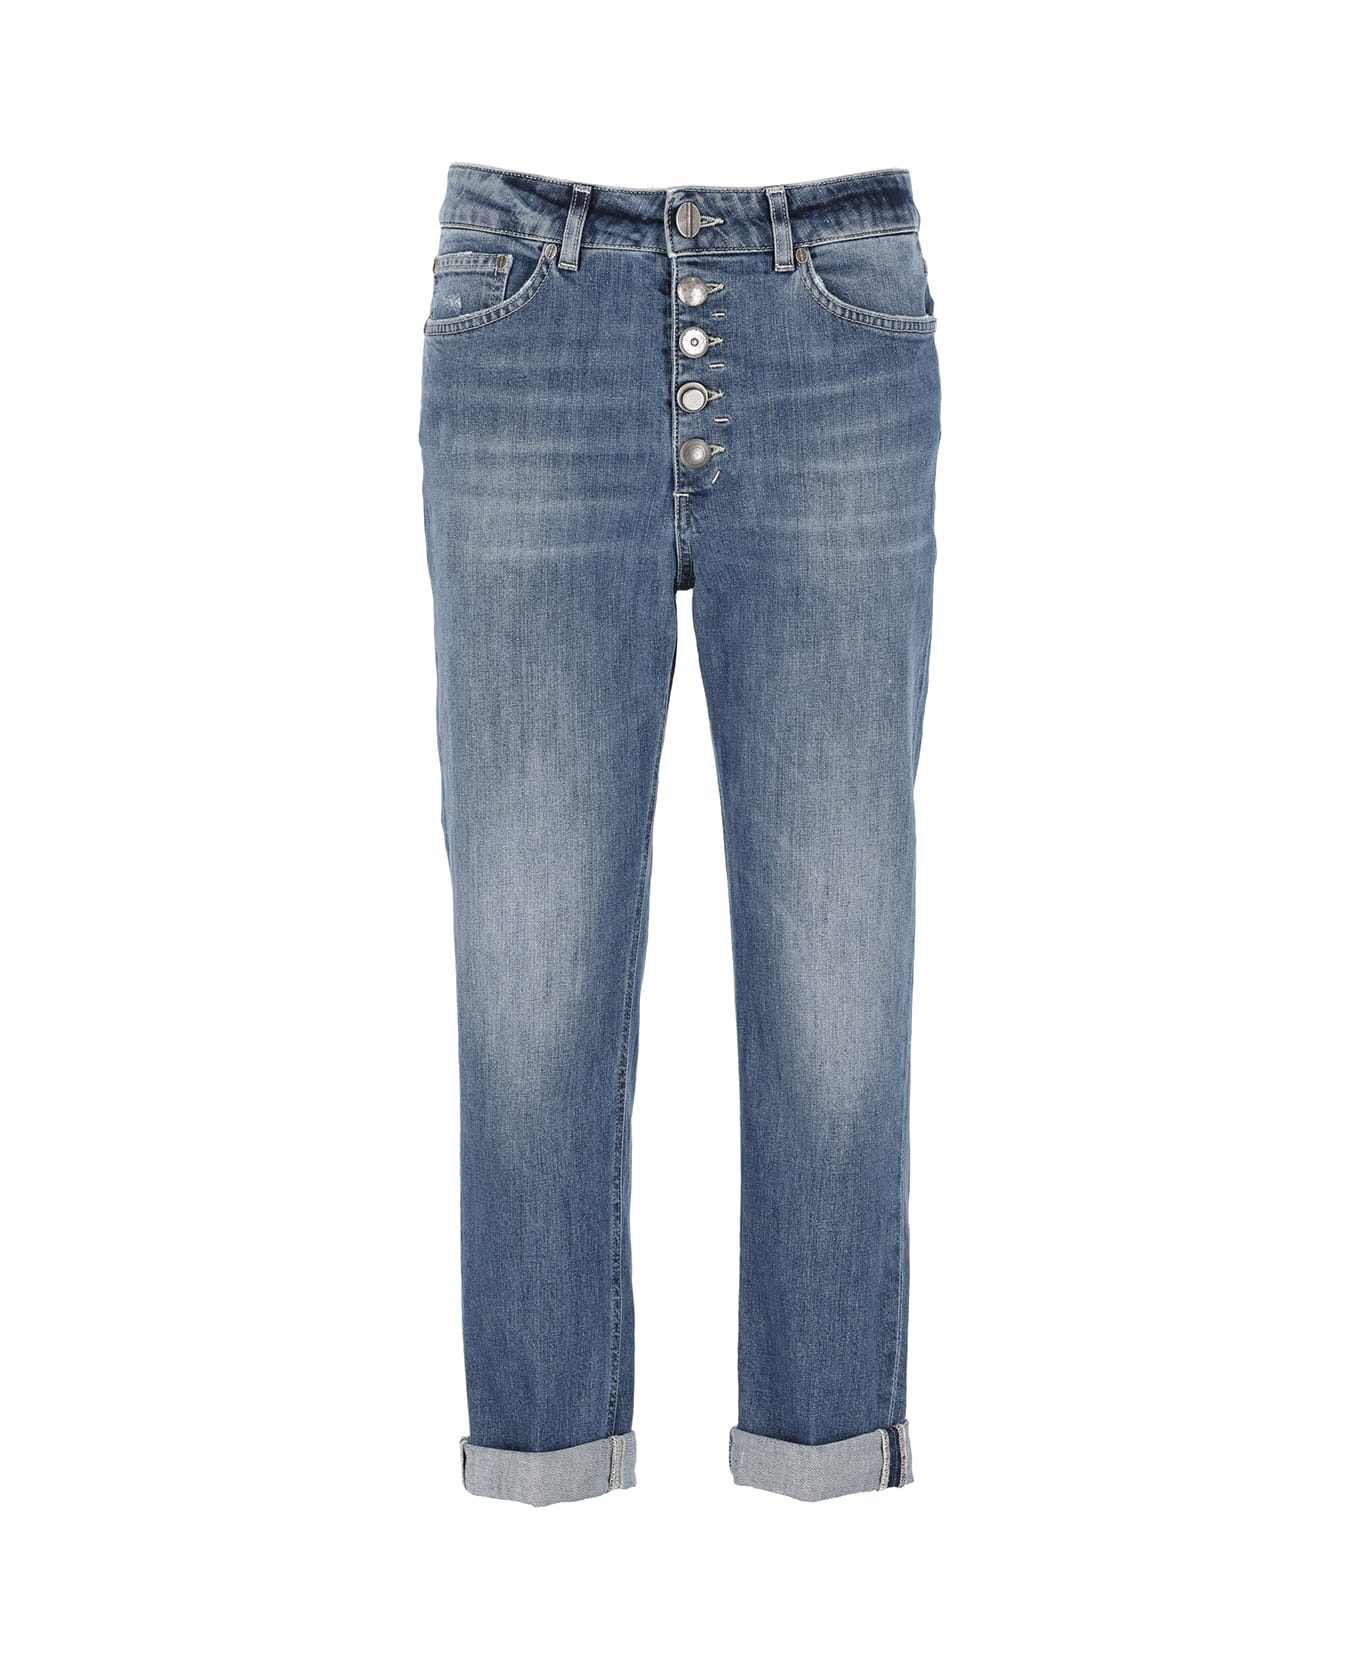 Dondup Blue High-waisted Jeans - Blue スウェットパンツ